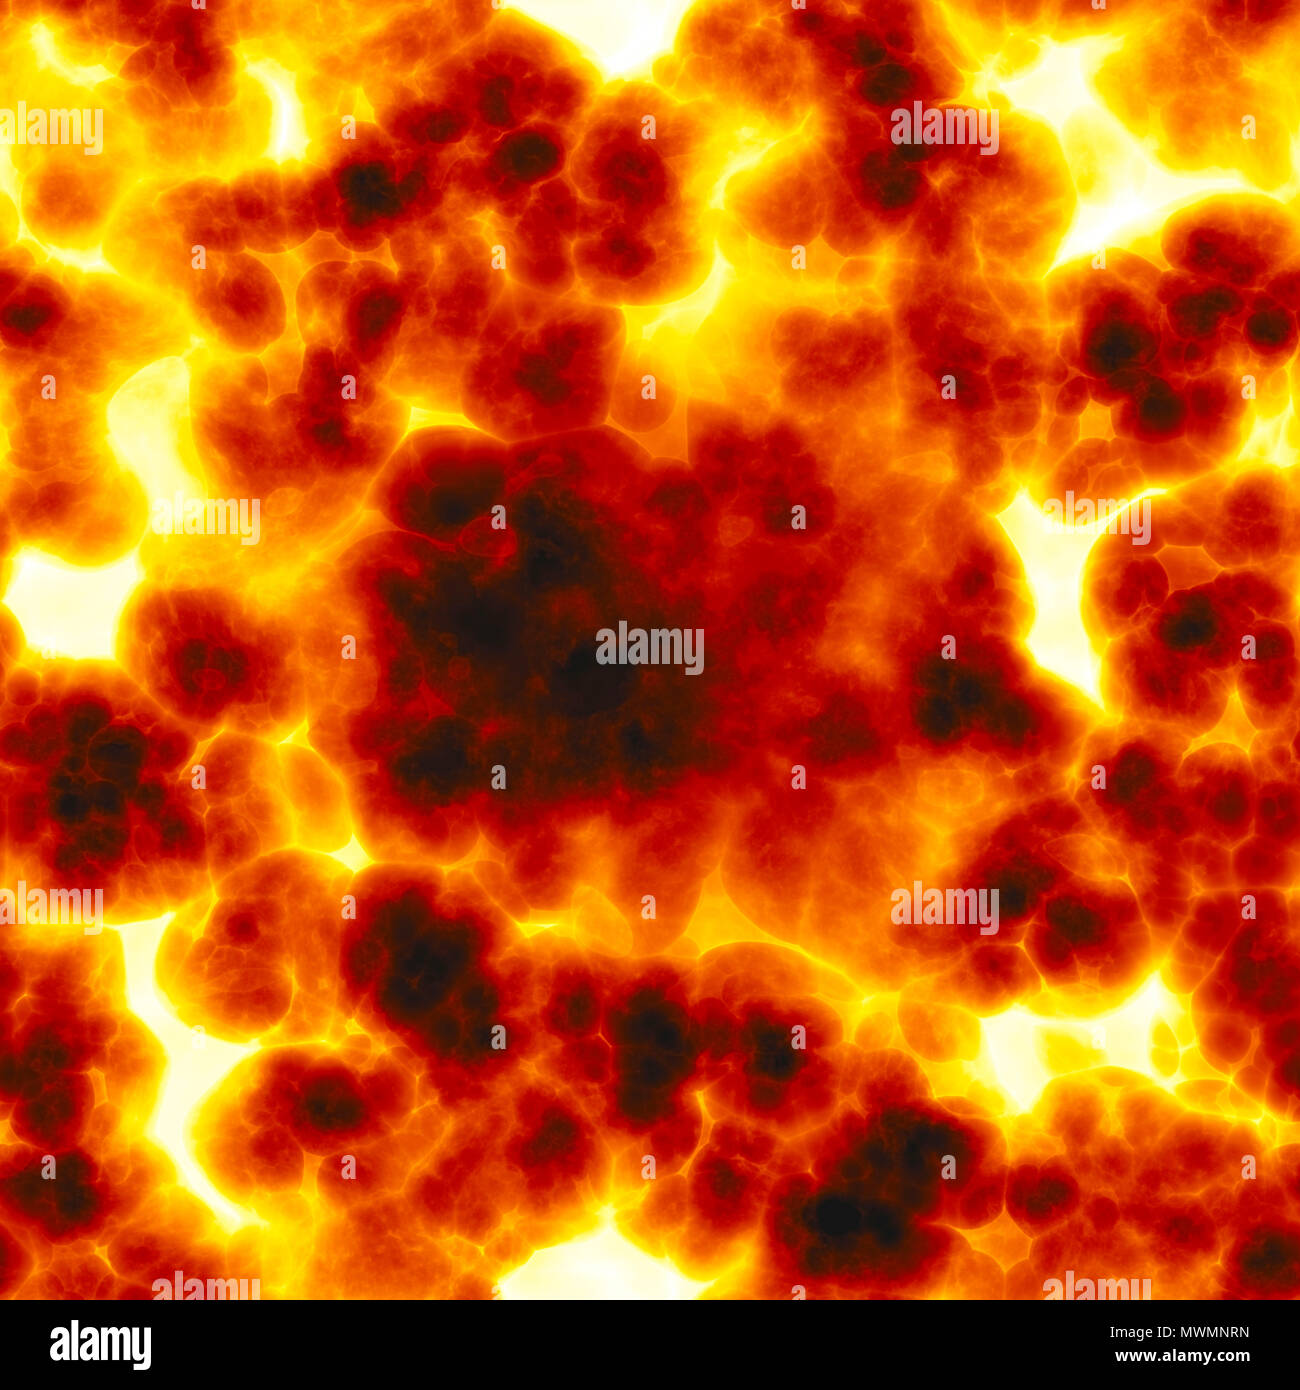 Texture of the sun, flames and fire background, burn Stock Photo